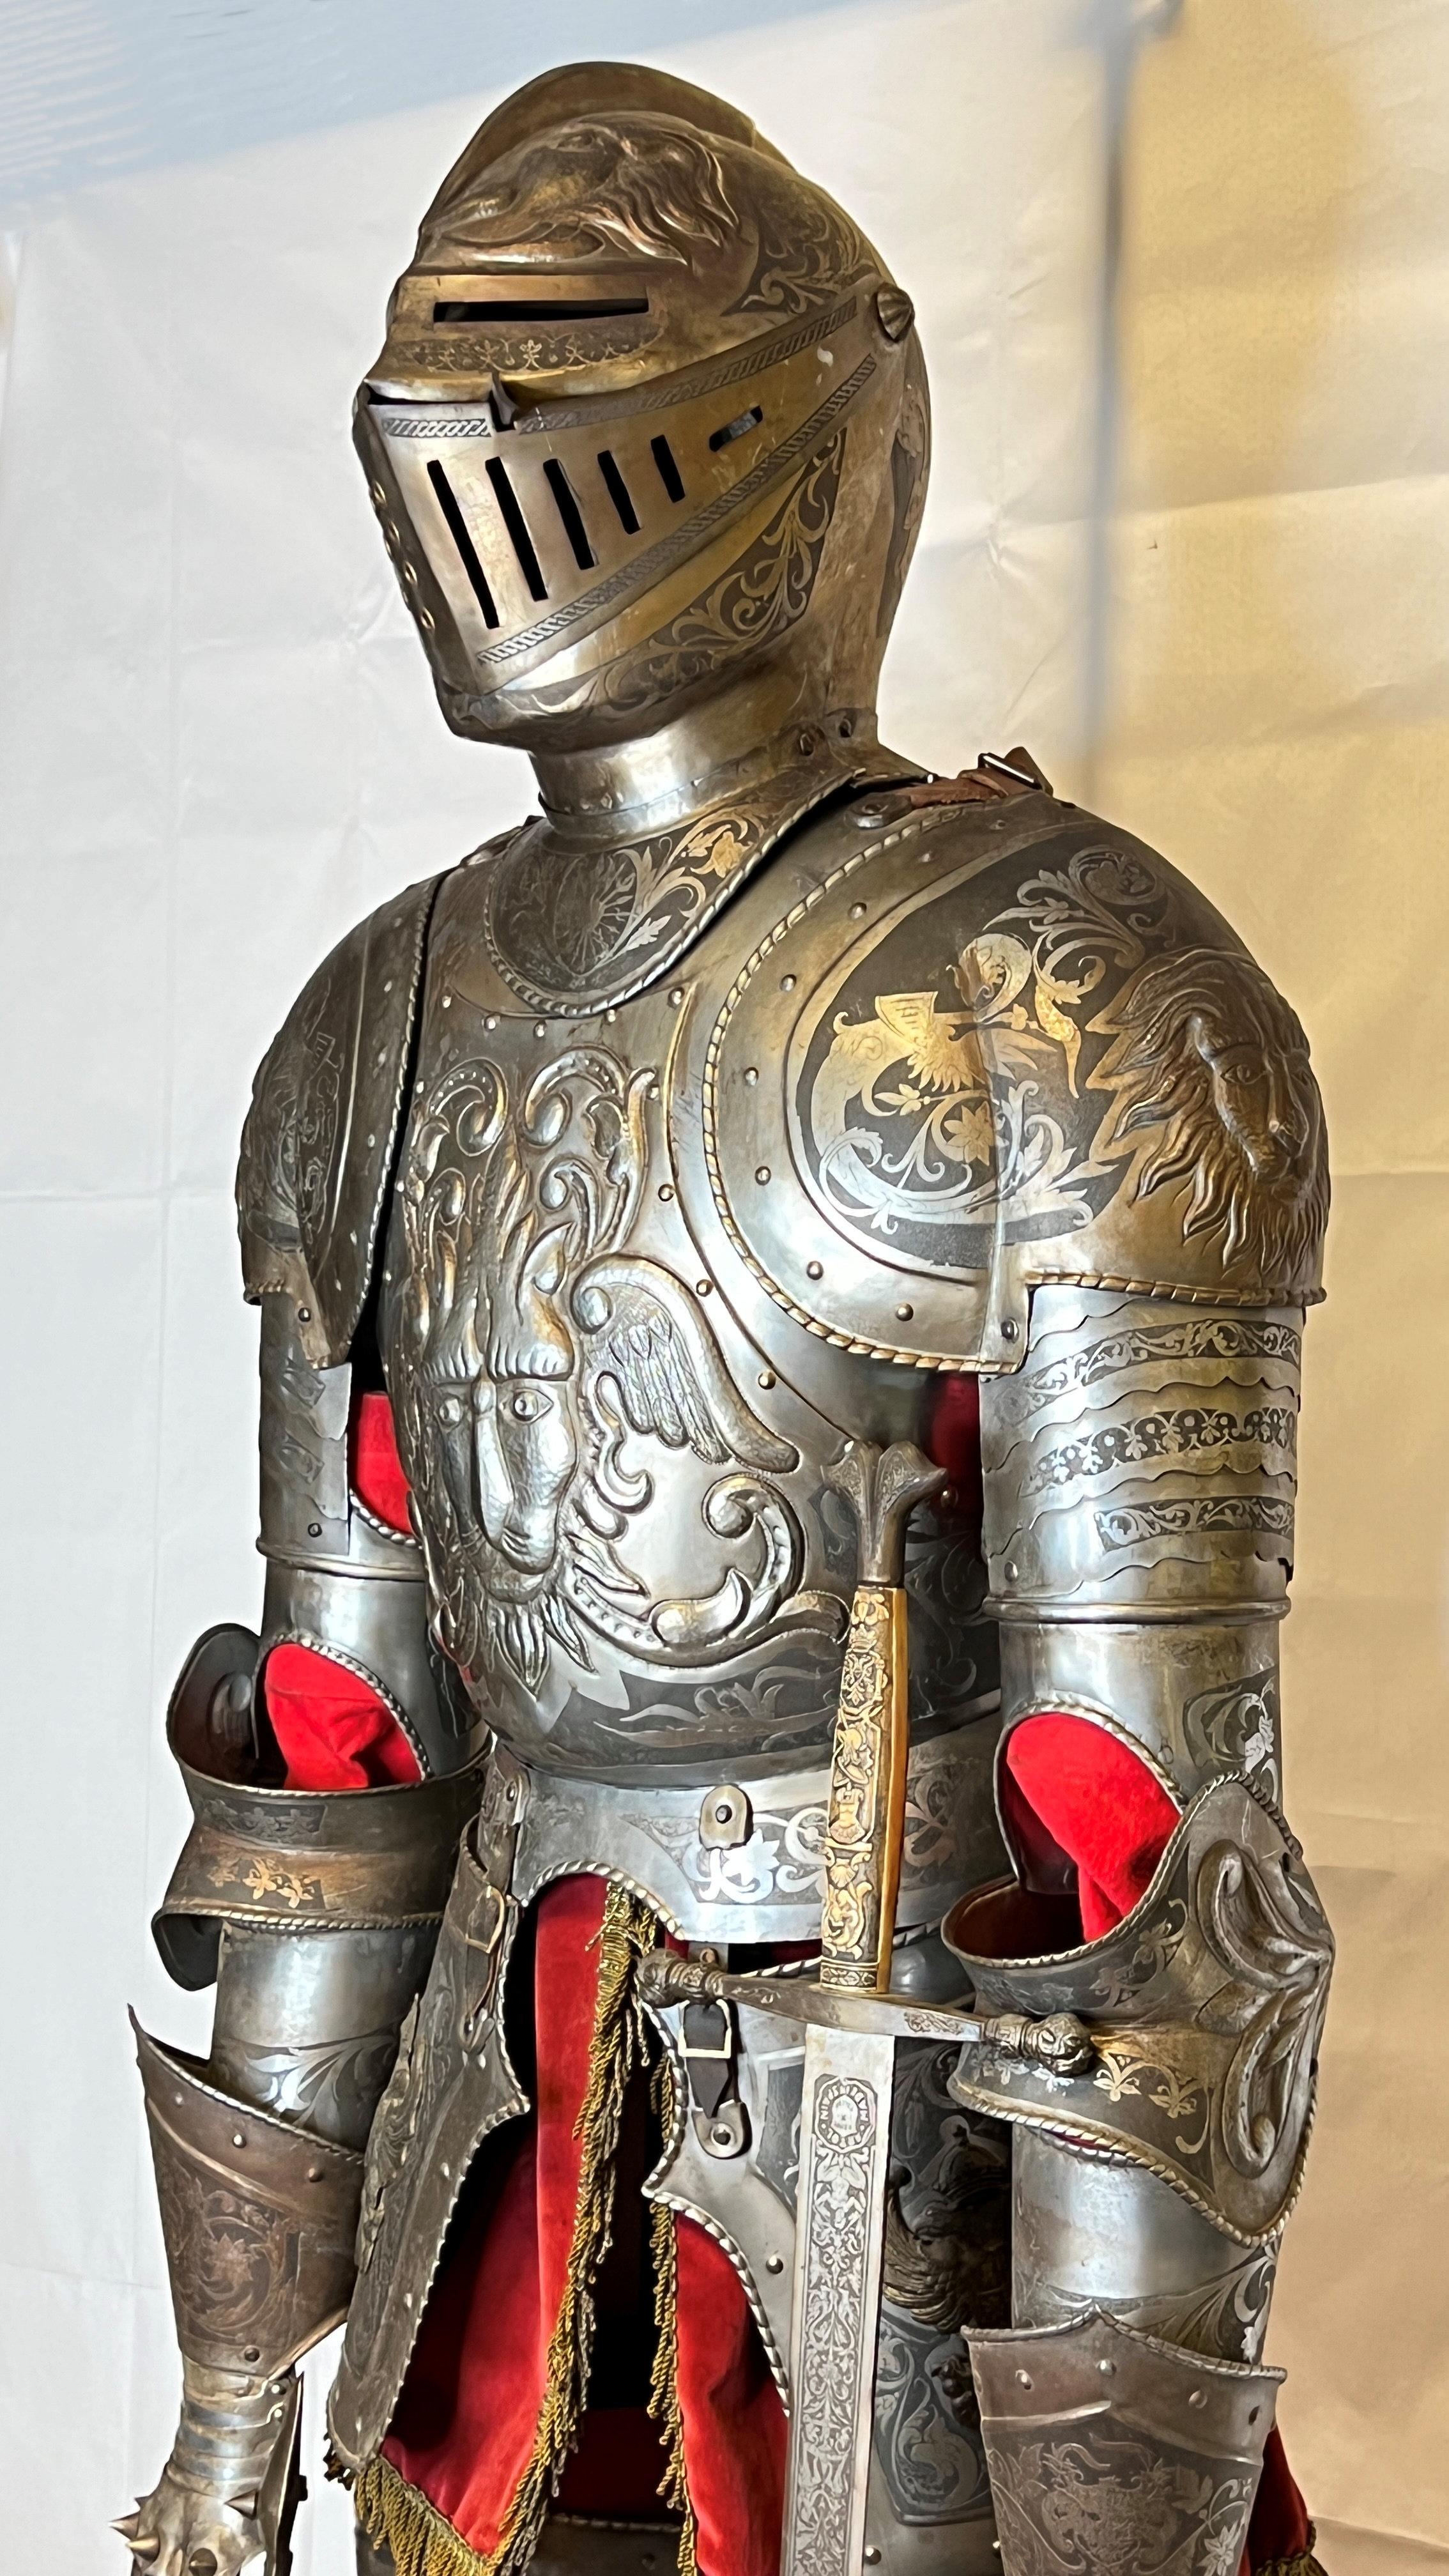 Medieval Life Size Spanish Toledo Ware Suit of Armor of Carlos V